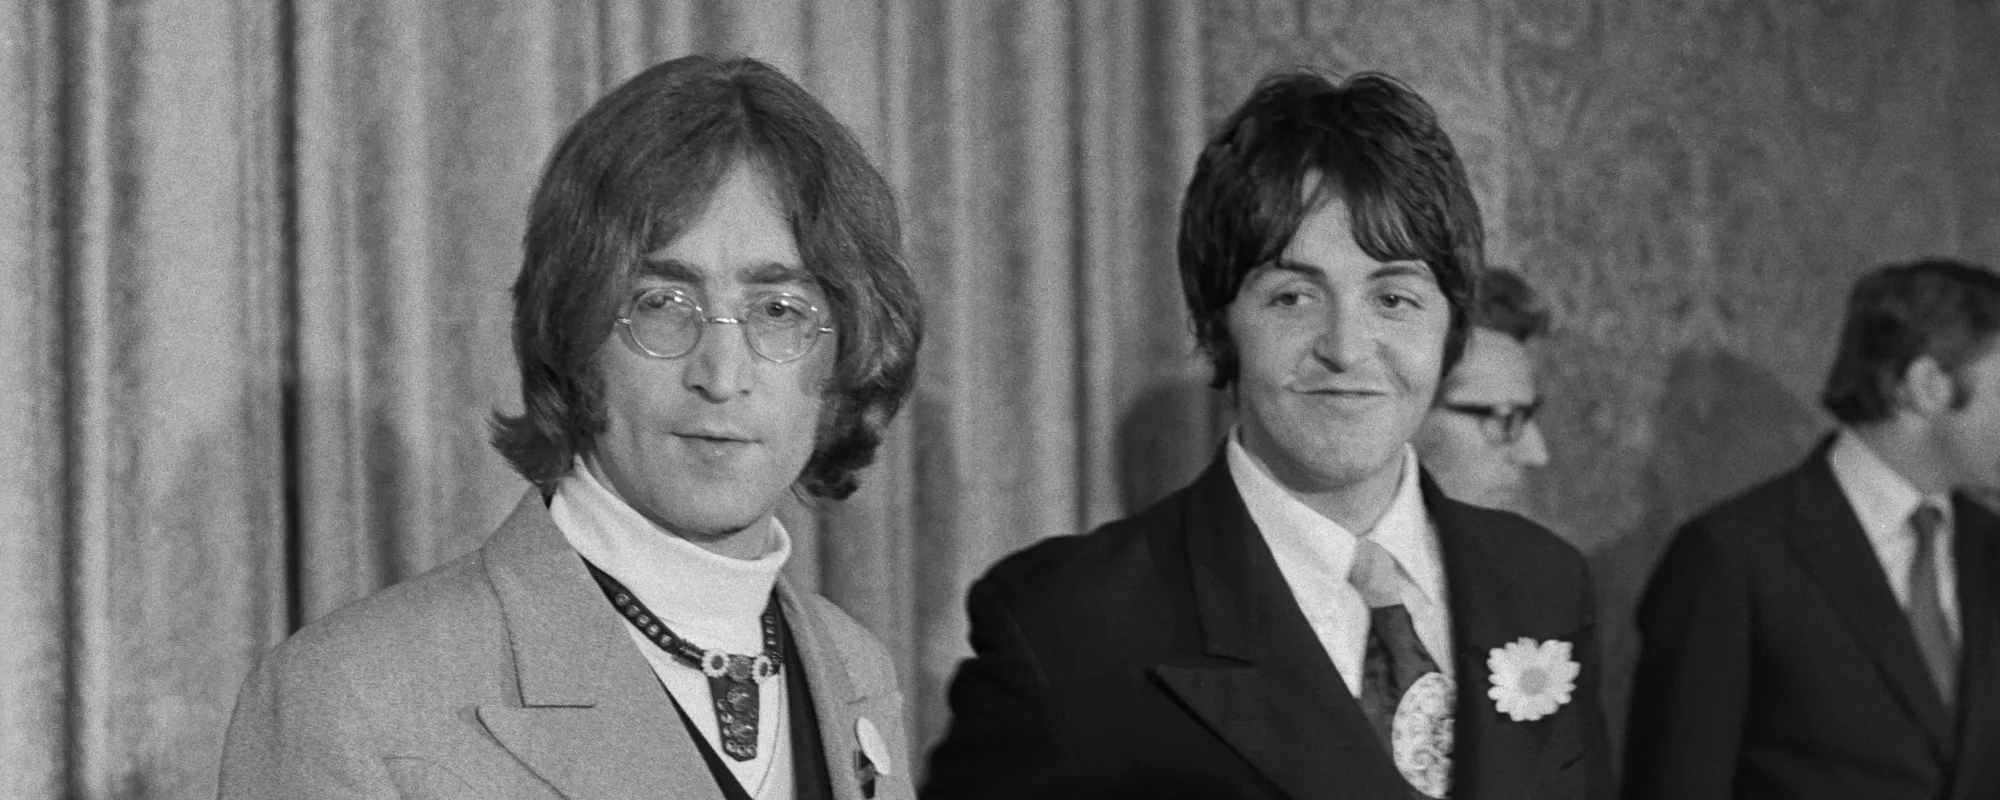 Behind the Meaning of the Beatles’ Controversial “Helter Skelter”